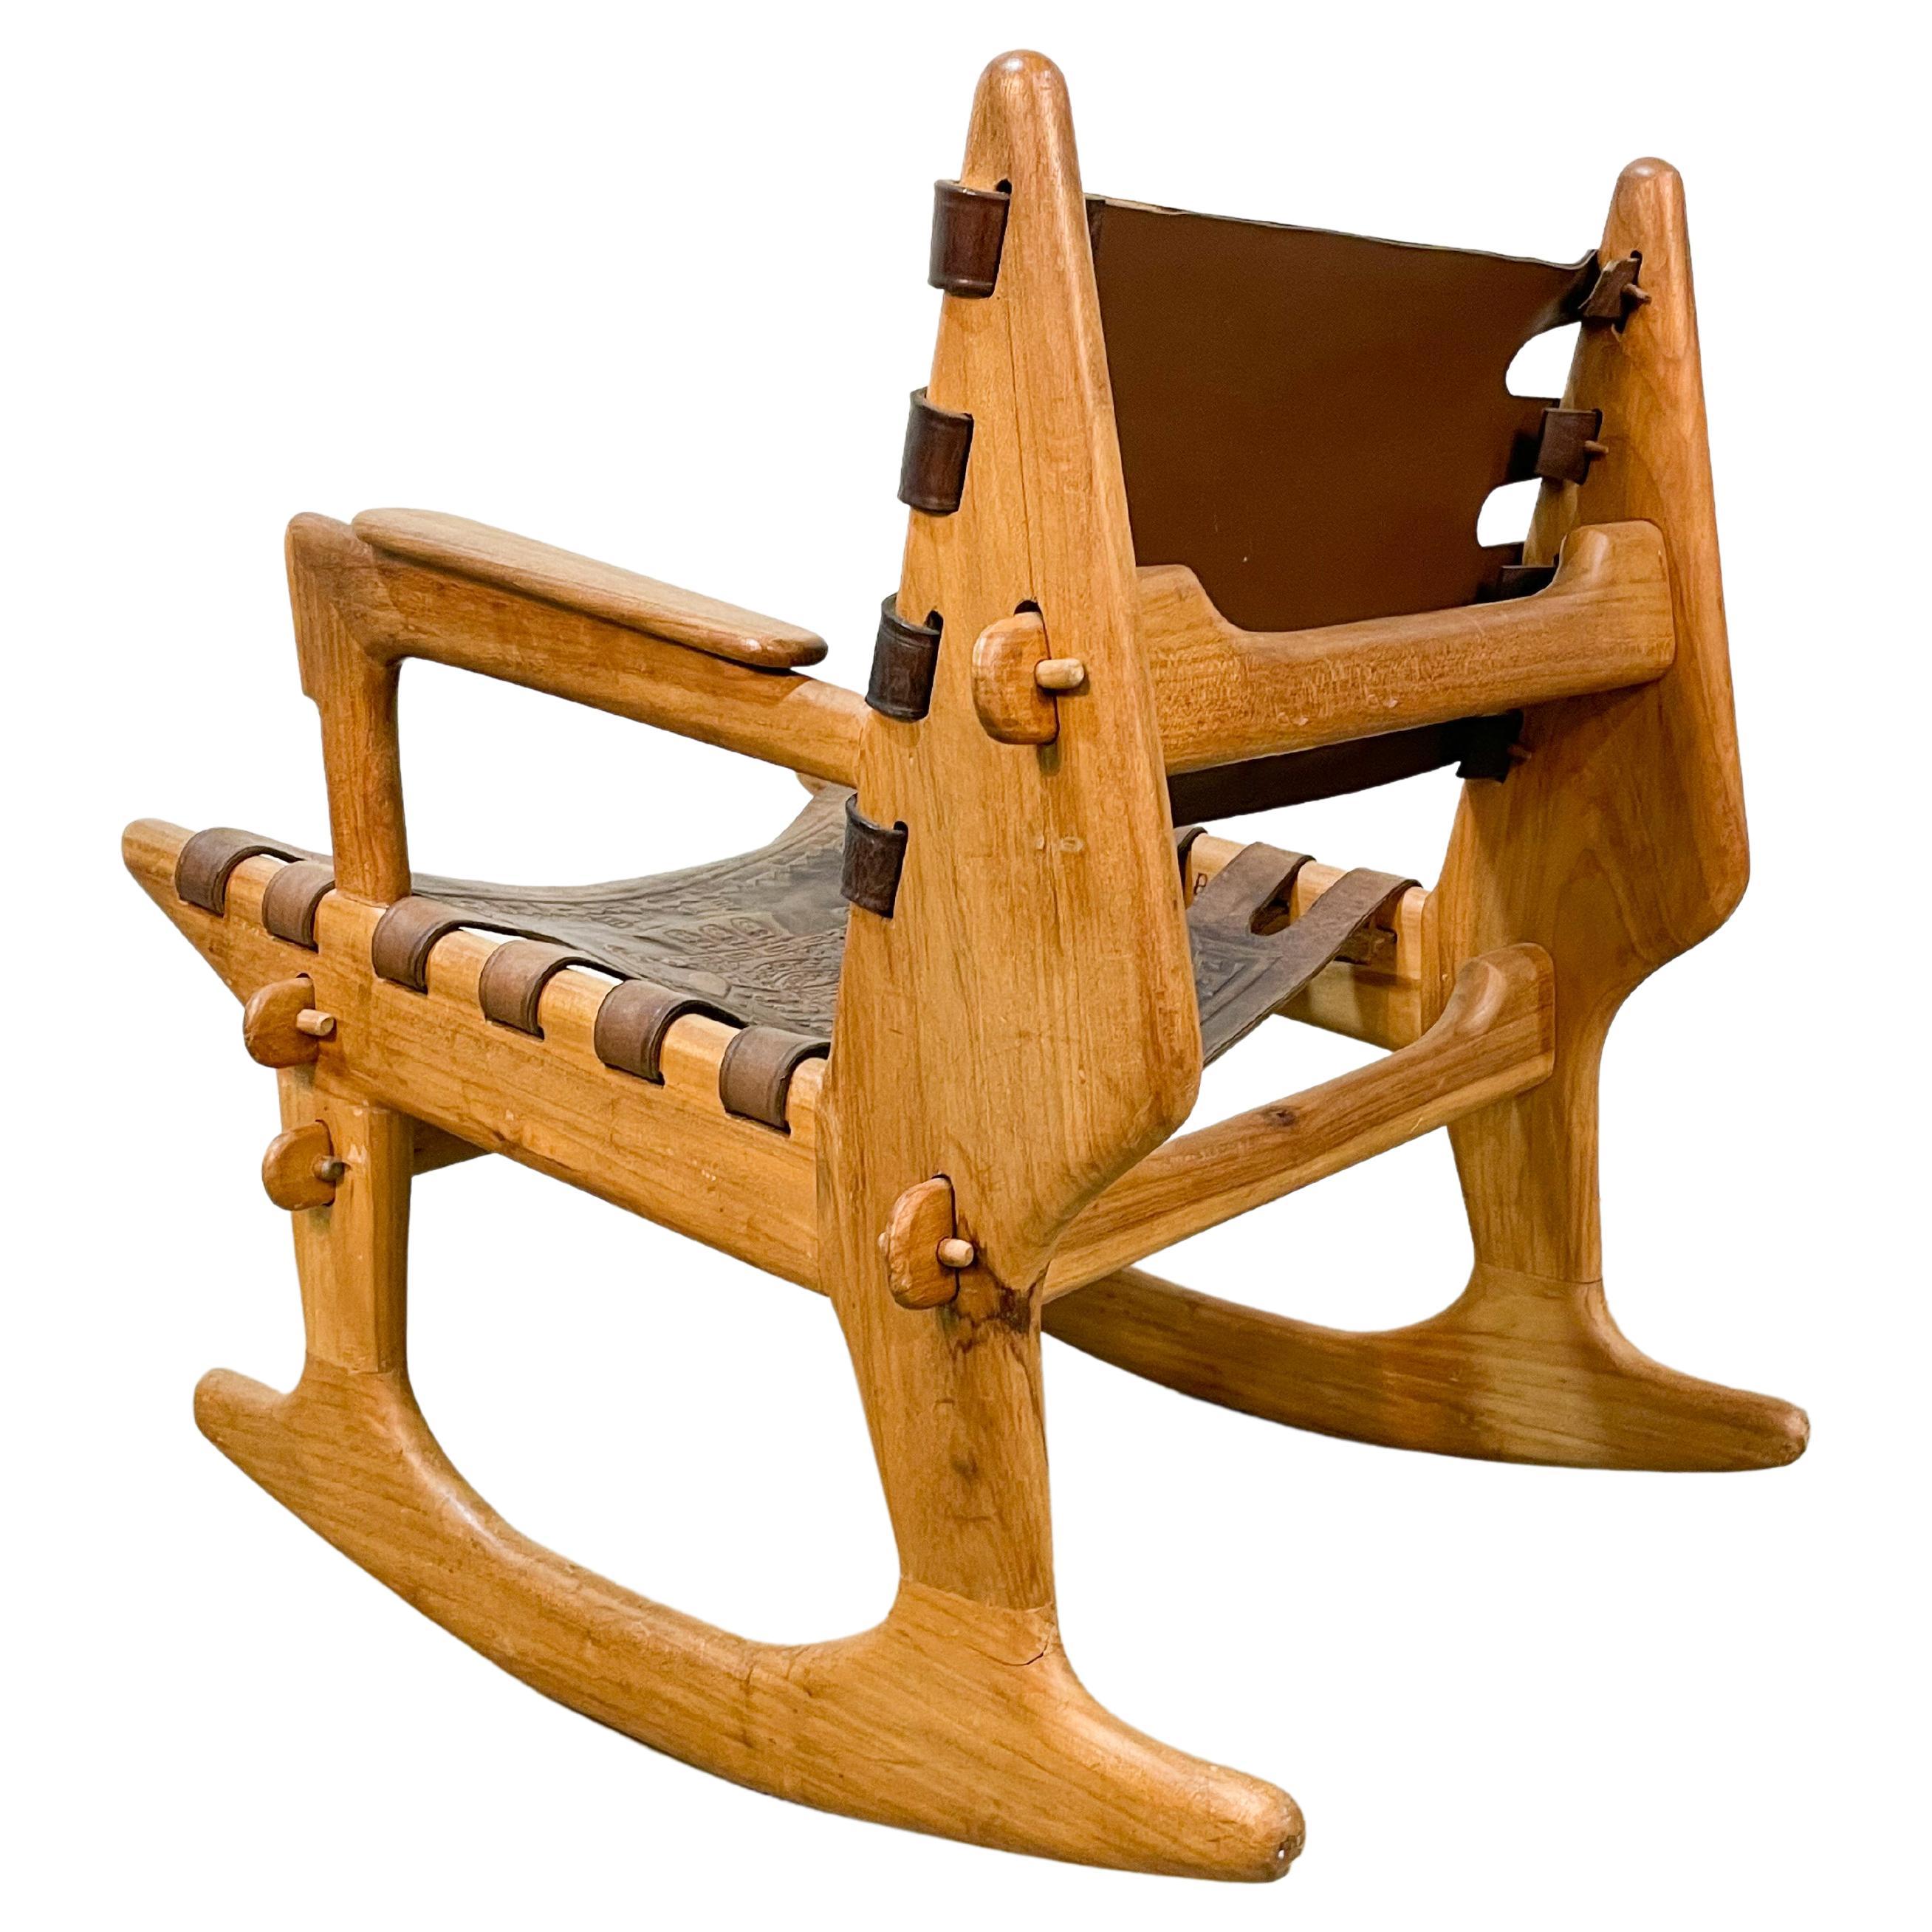 Unique organic modern form rocking chair designed by Angel Pazmino and made by Muebles de Estilo in Quito, Ecuador, in the 1960s. Interlocking frames of solid Laurelwood held together by simple pegs provide a constructivist quality and the